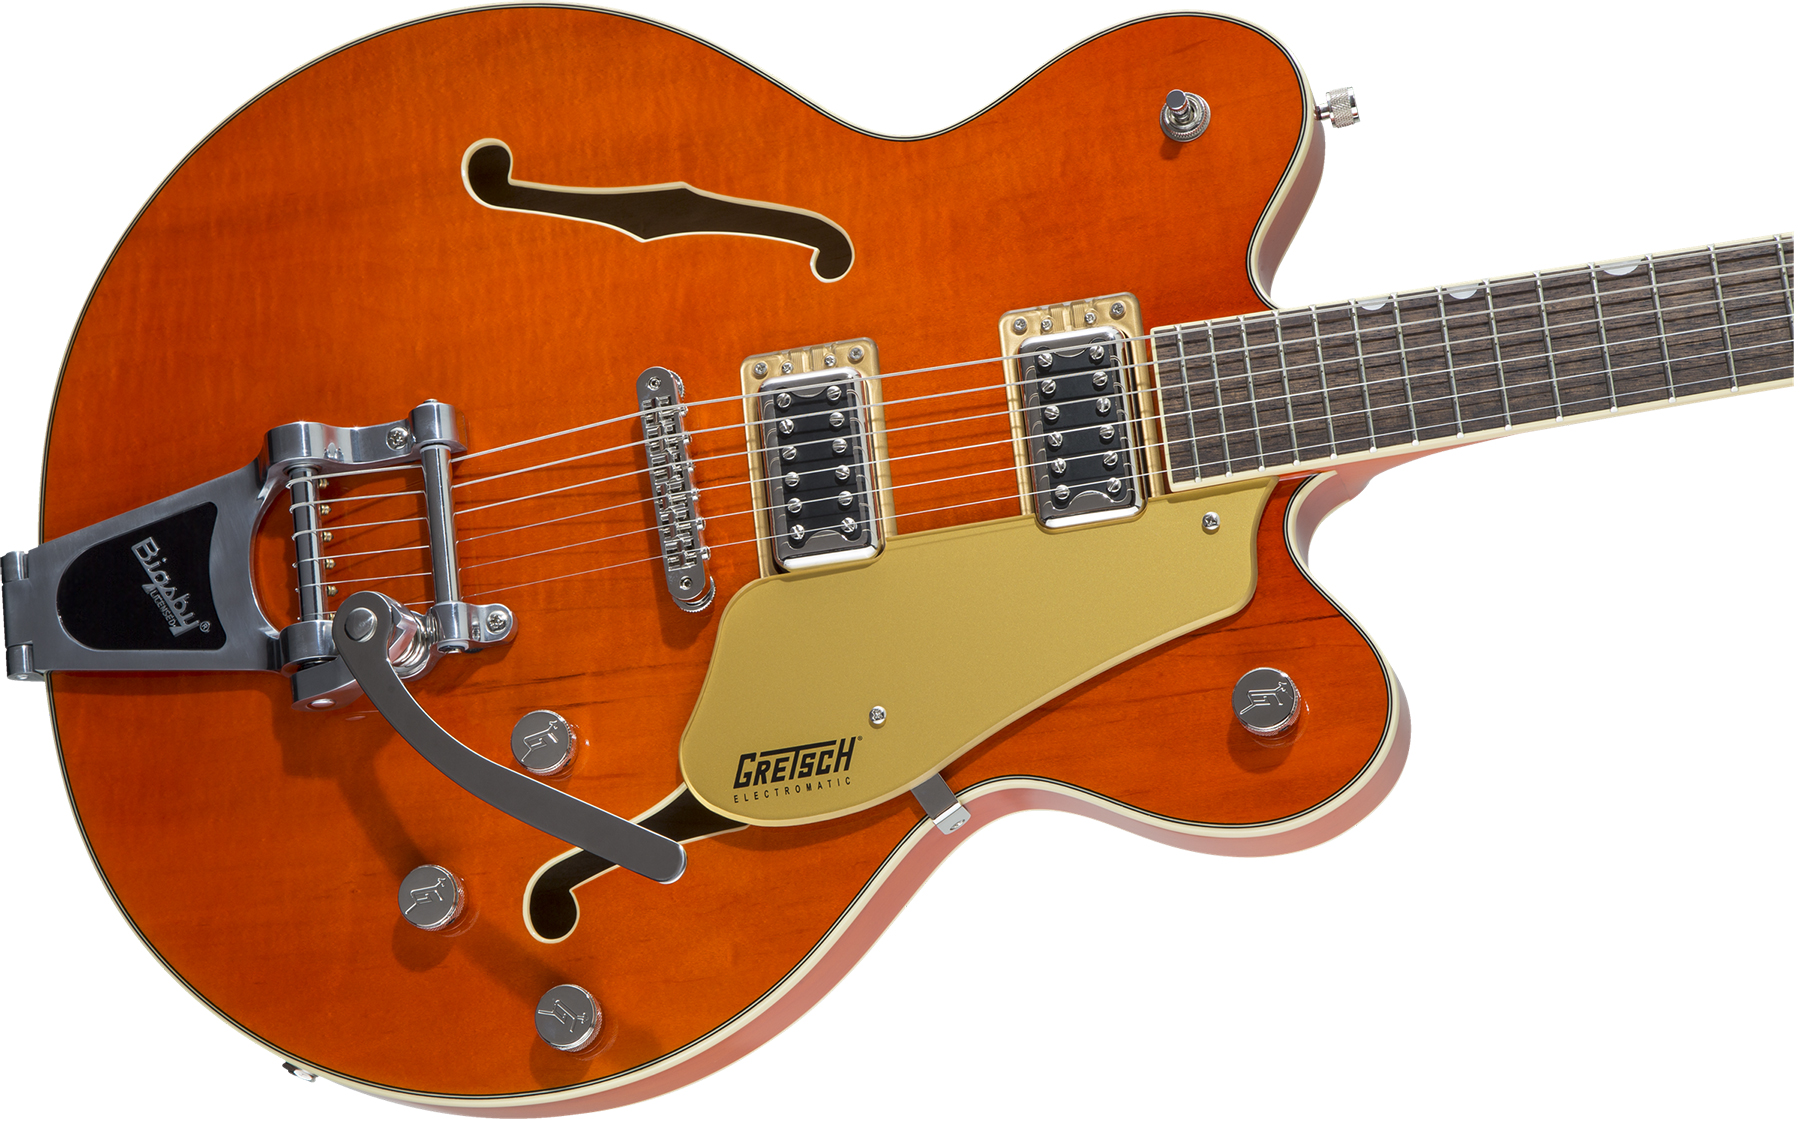 Gretsch G5622t Center Bloc Double Cut Bigsby Electromatic 2019 Hh Lau - Orange Stain - Semi-hollow electric guitar - Variation 2